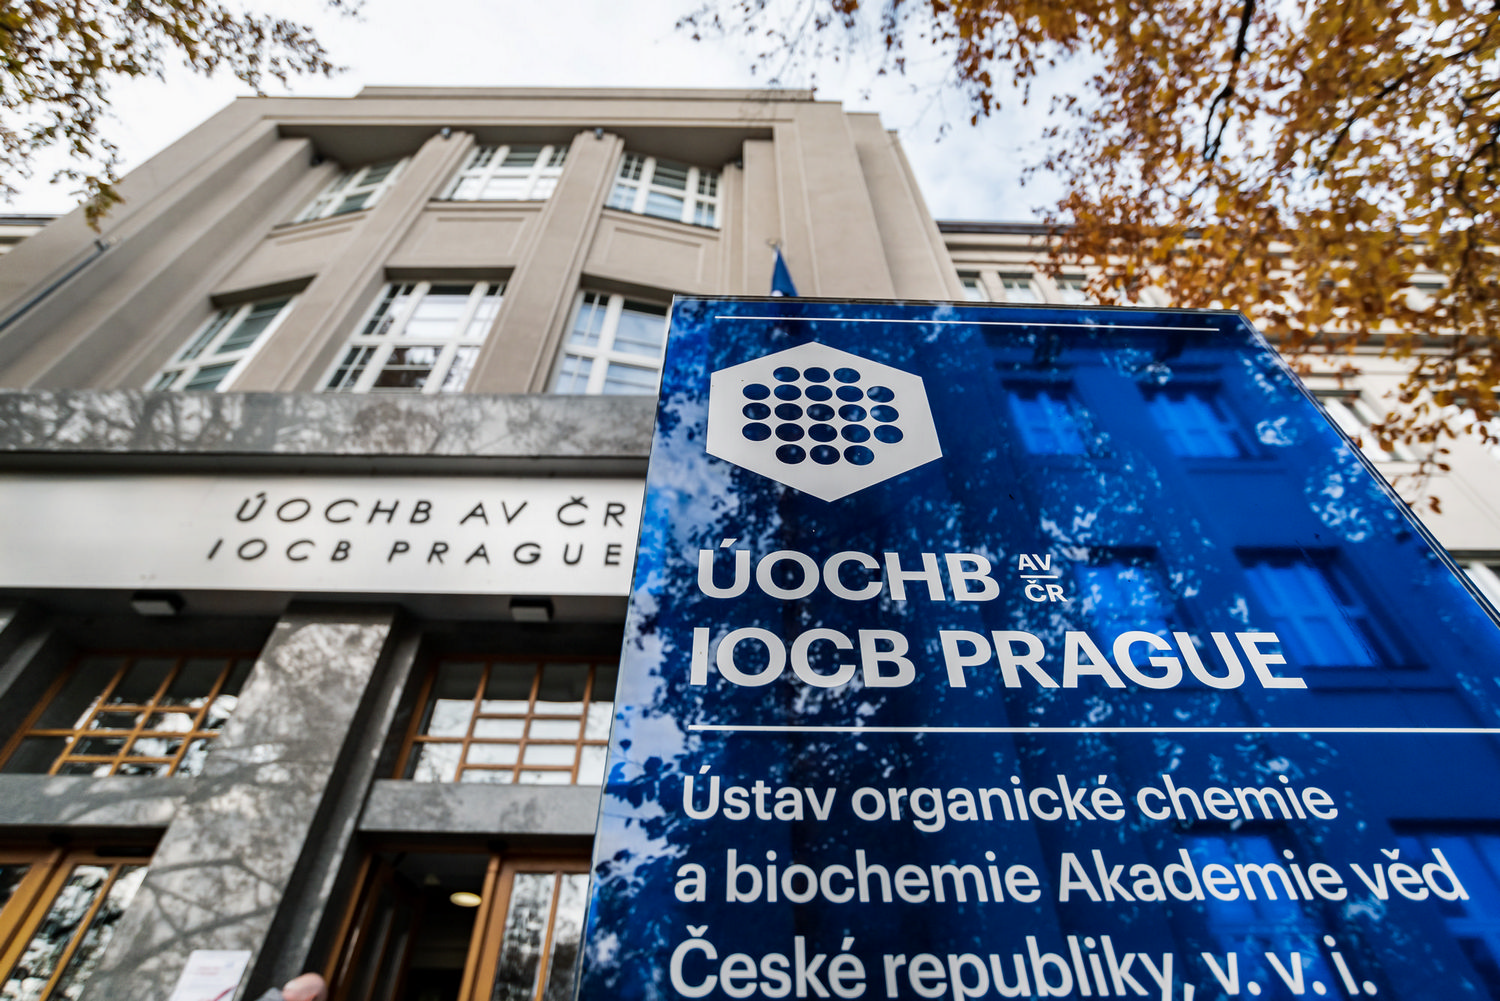 IOCB Prague opens branch in Boston, USA, prepares to make progress in cancer research